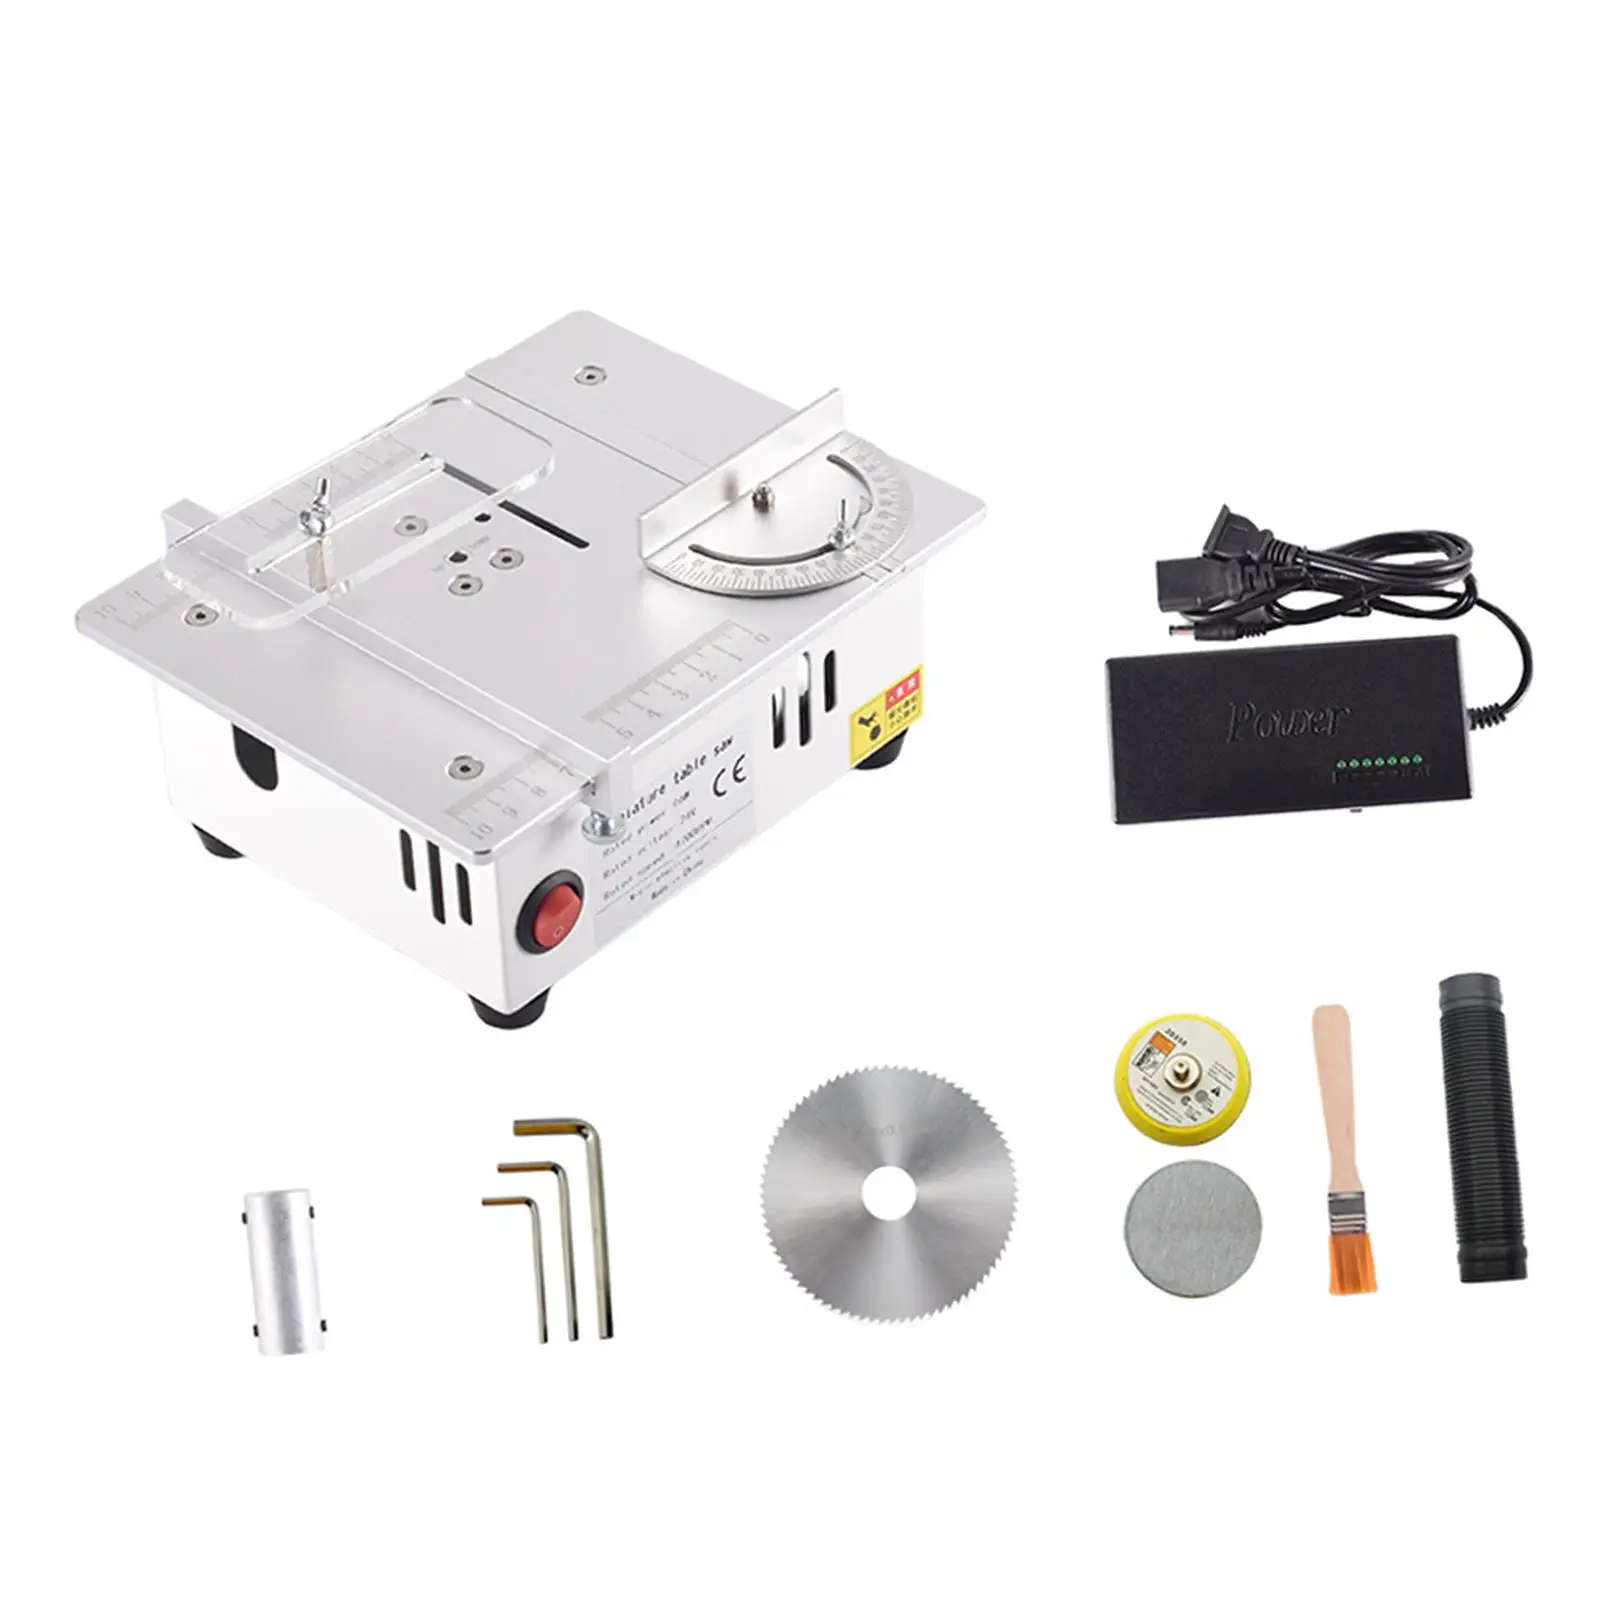 Mini Desktop Saw High Precision Household Multifunctional Micro Table Saw for Crafting Wood Cutting Acrylic Cutting Crafts EU